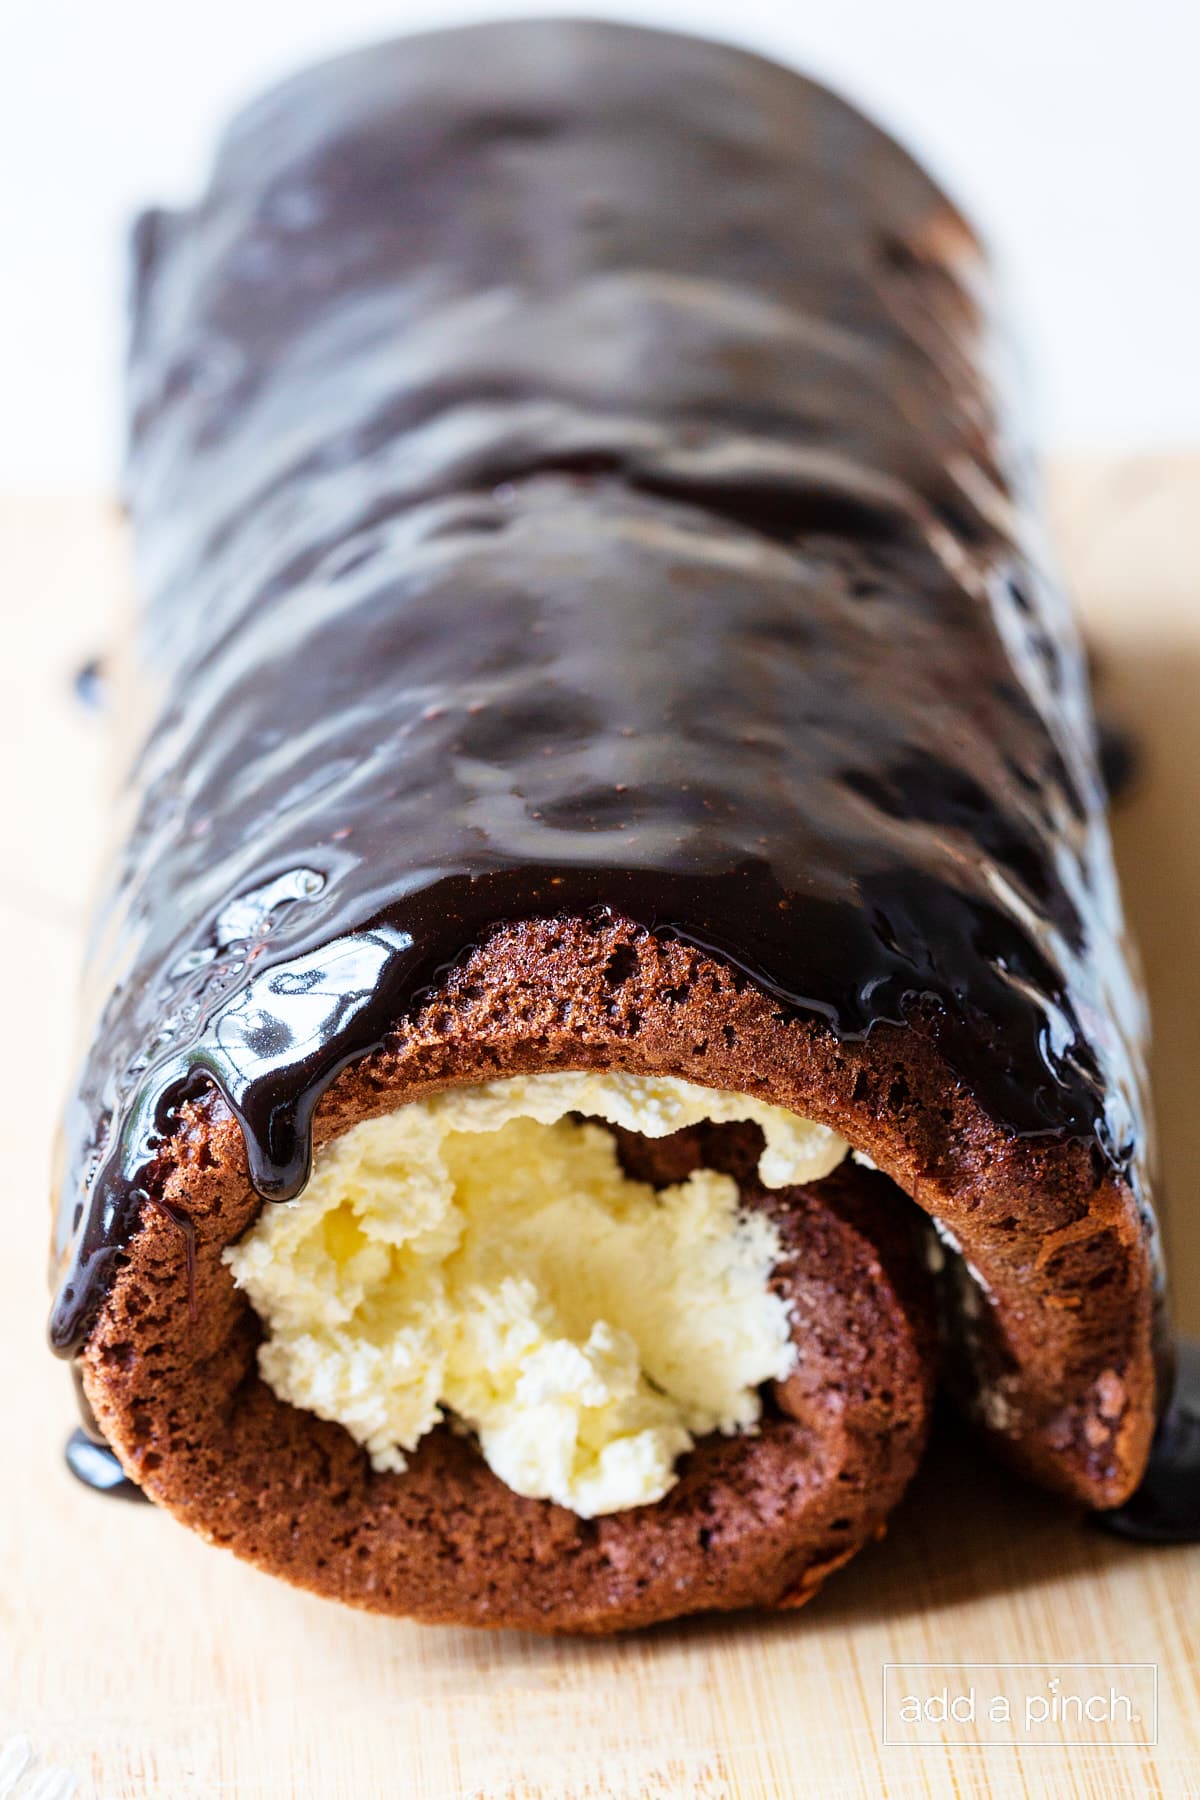 Chocolate cake roll with ganache frosting.